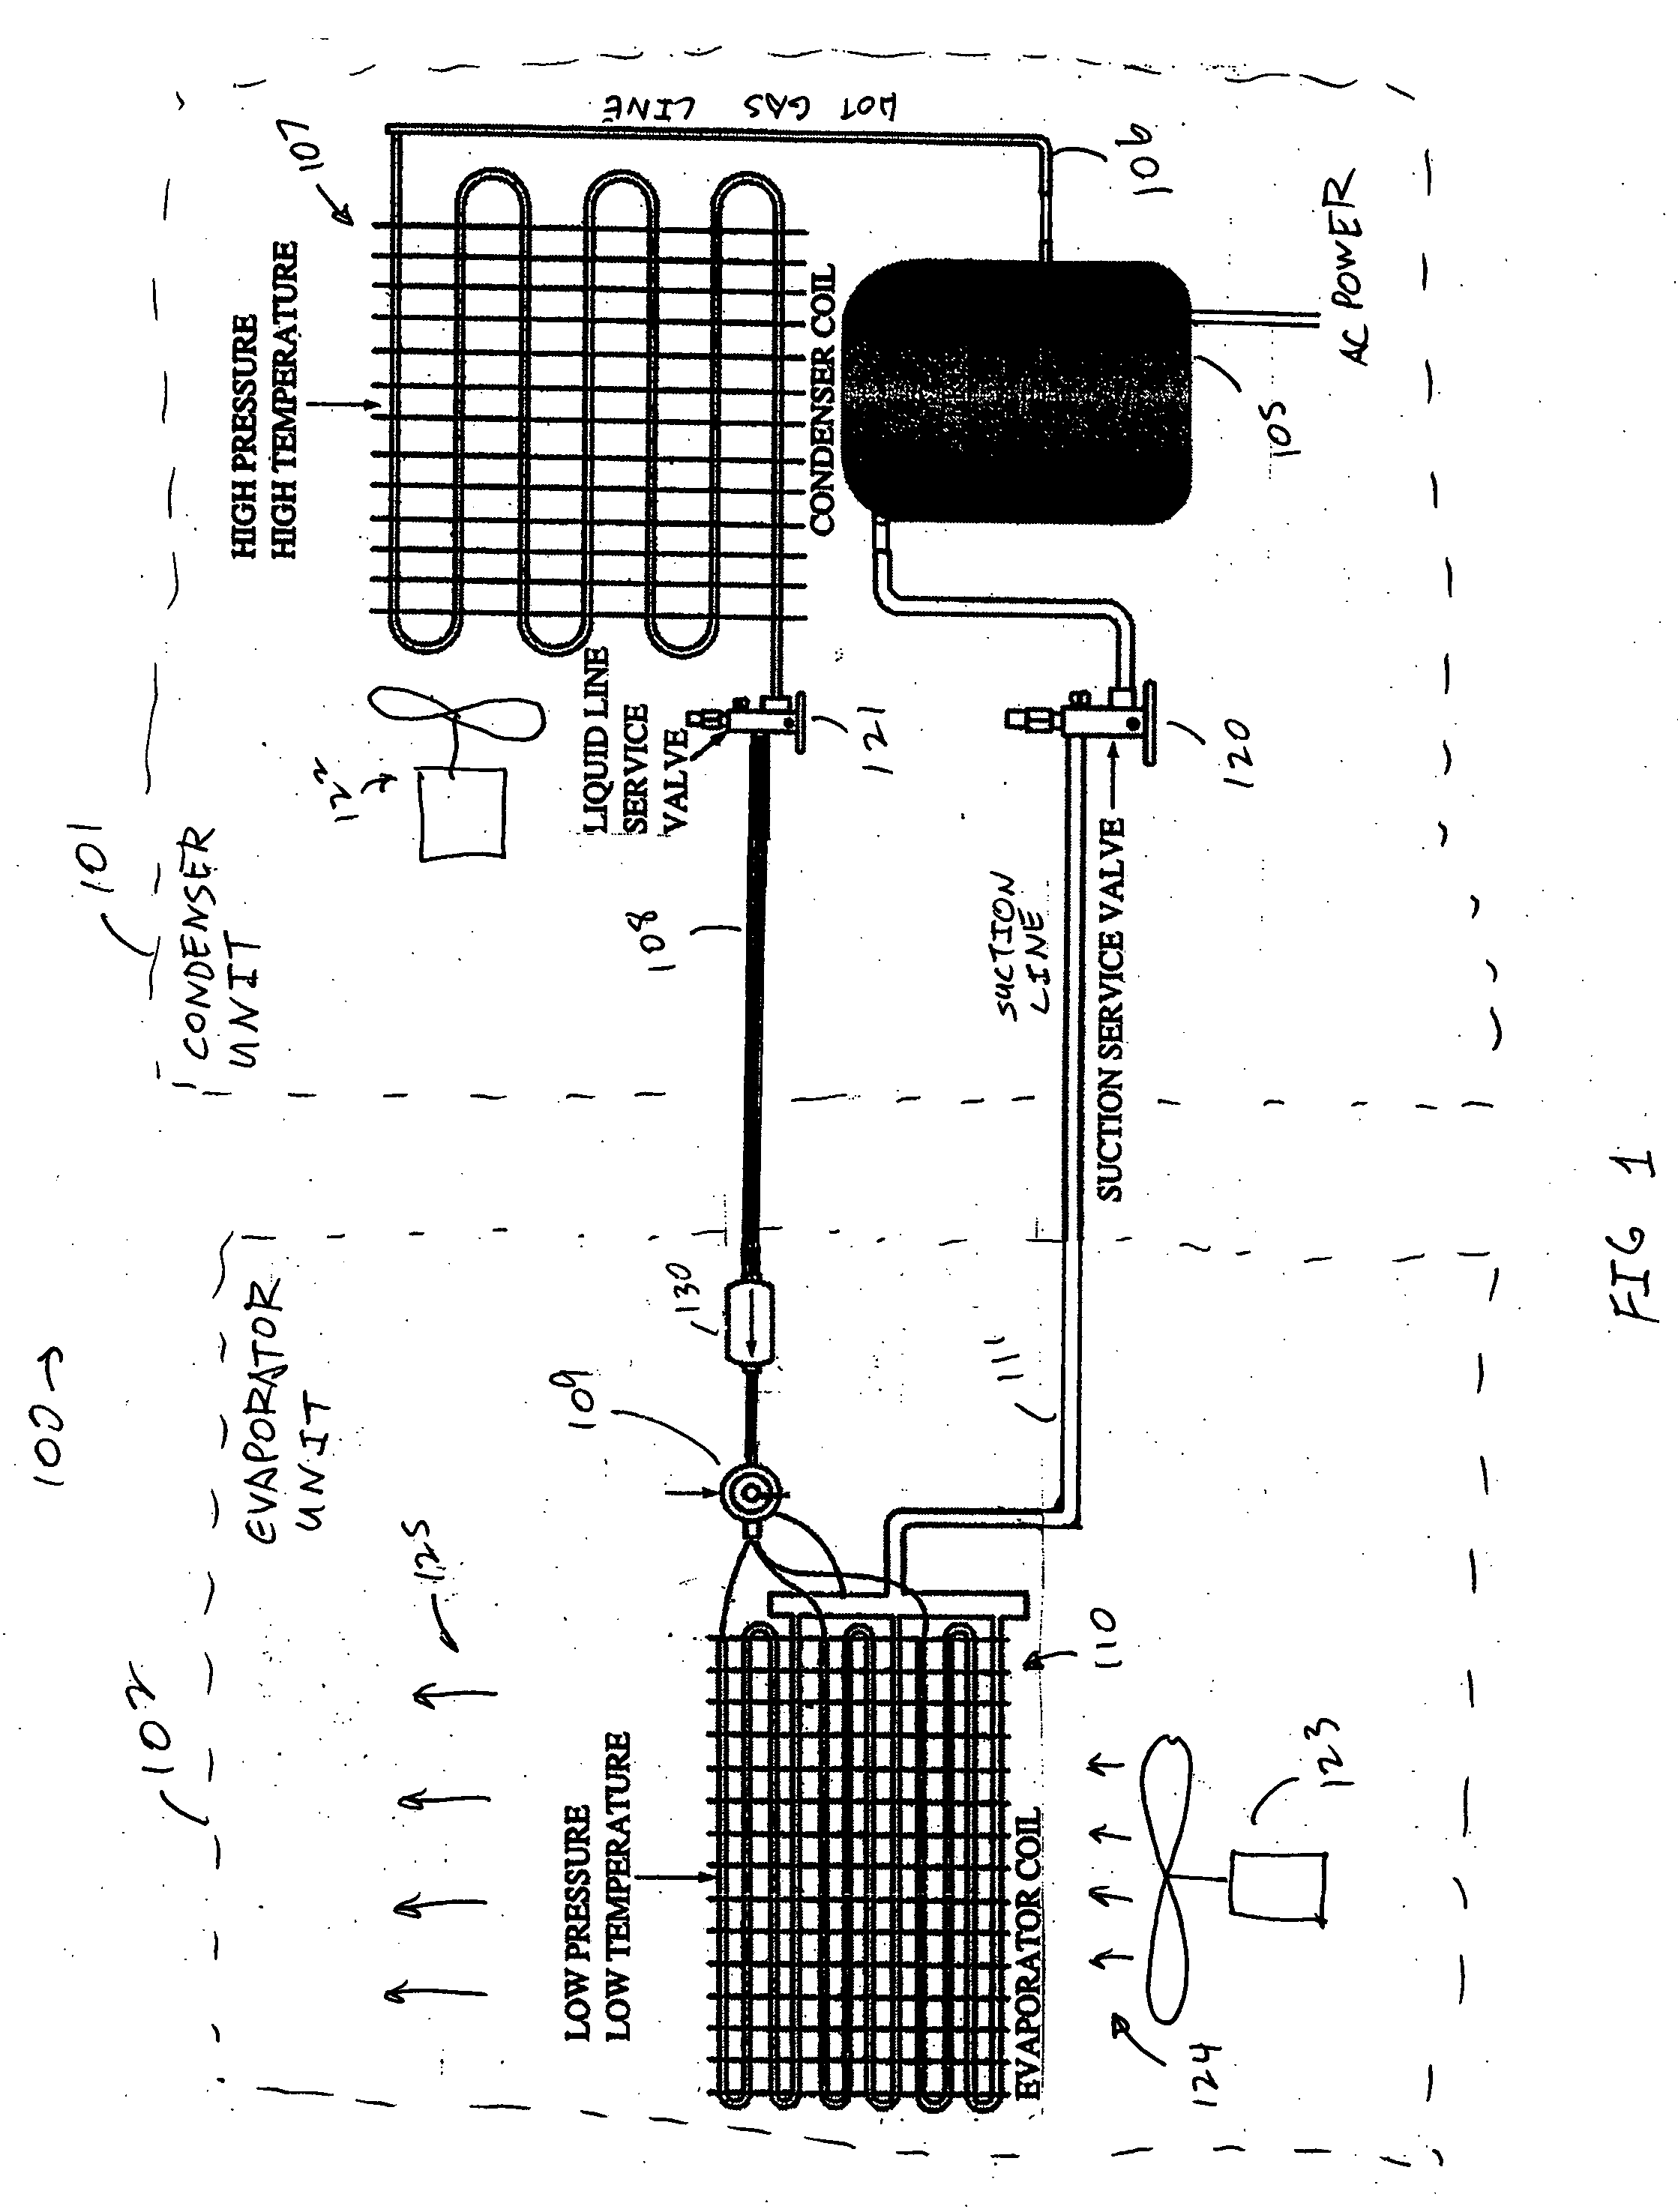 Method and apparatus for monitoring refrigerant-cycle systems